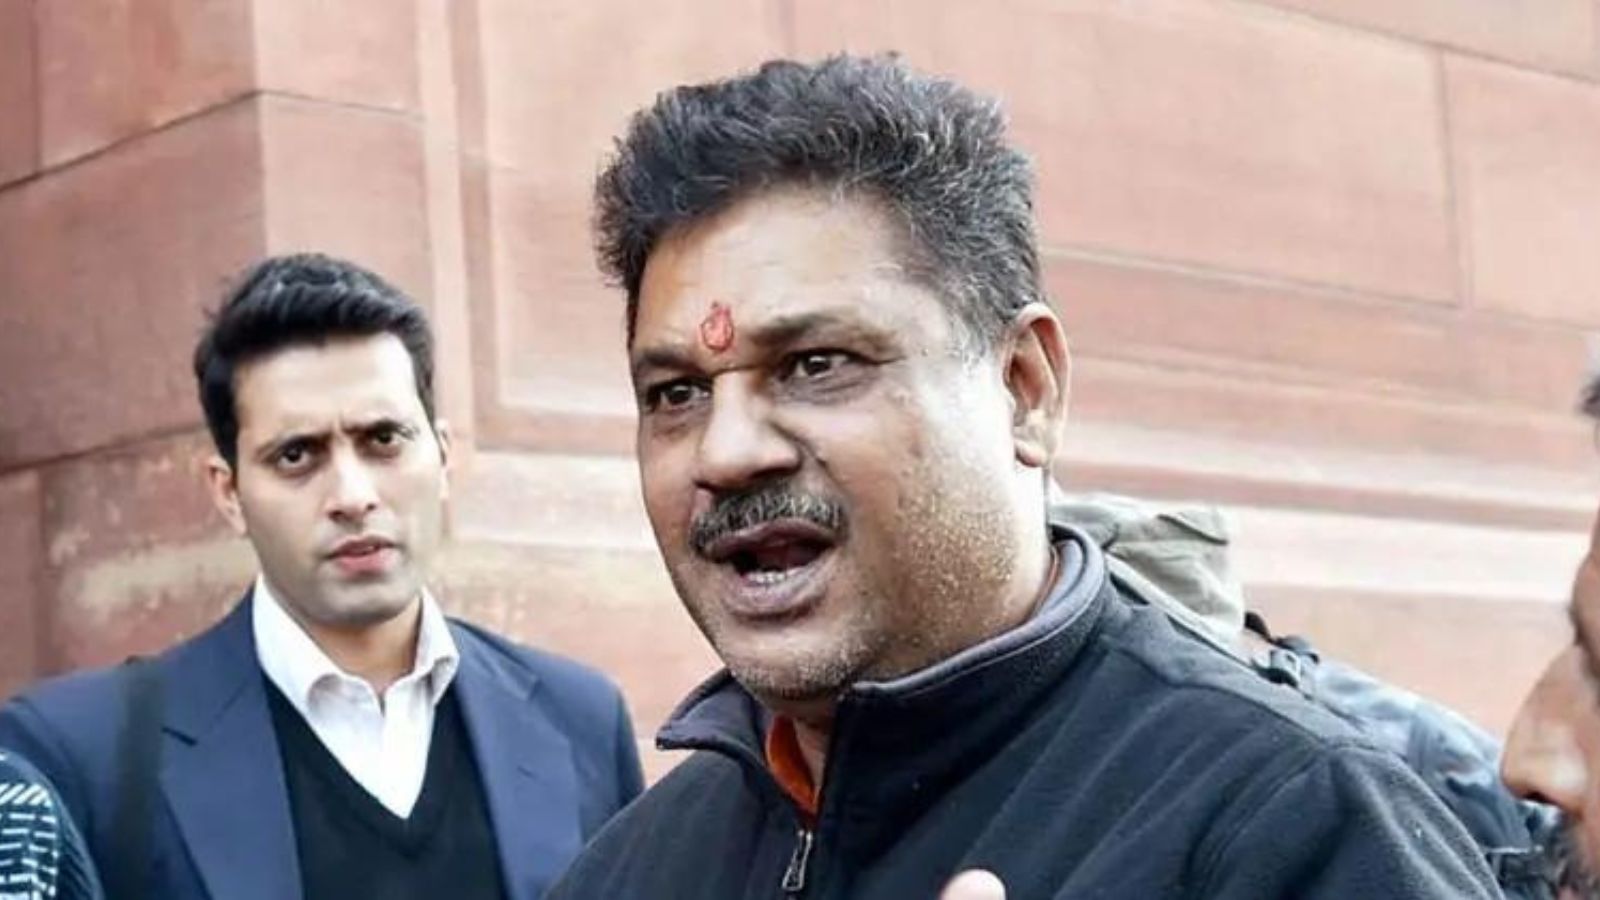 Kirti Azad, 1983 World Cup winner, reflects on his Lok Sabha victory: Playing for country vs. playing for party | Cricket News